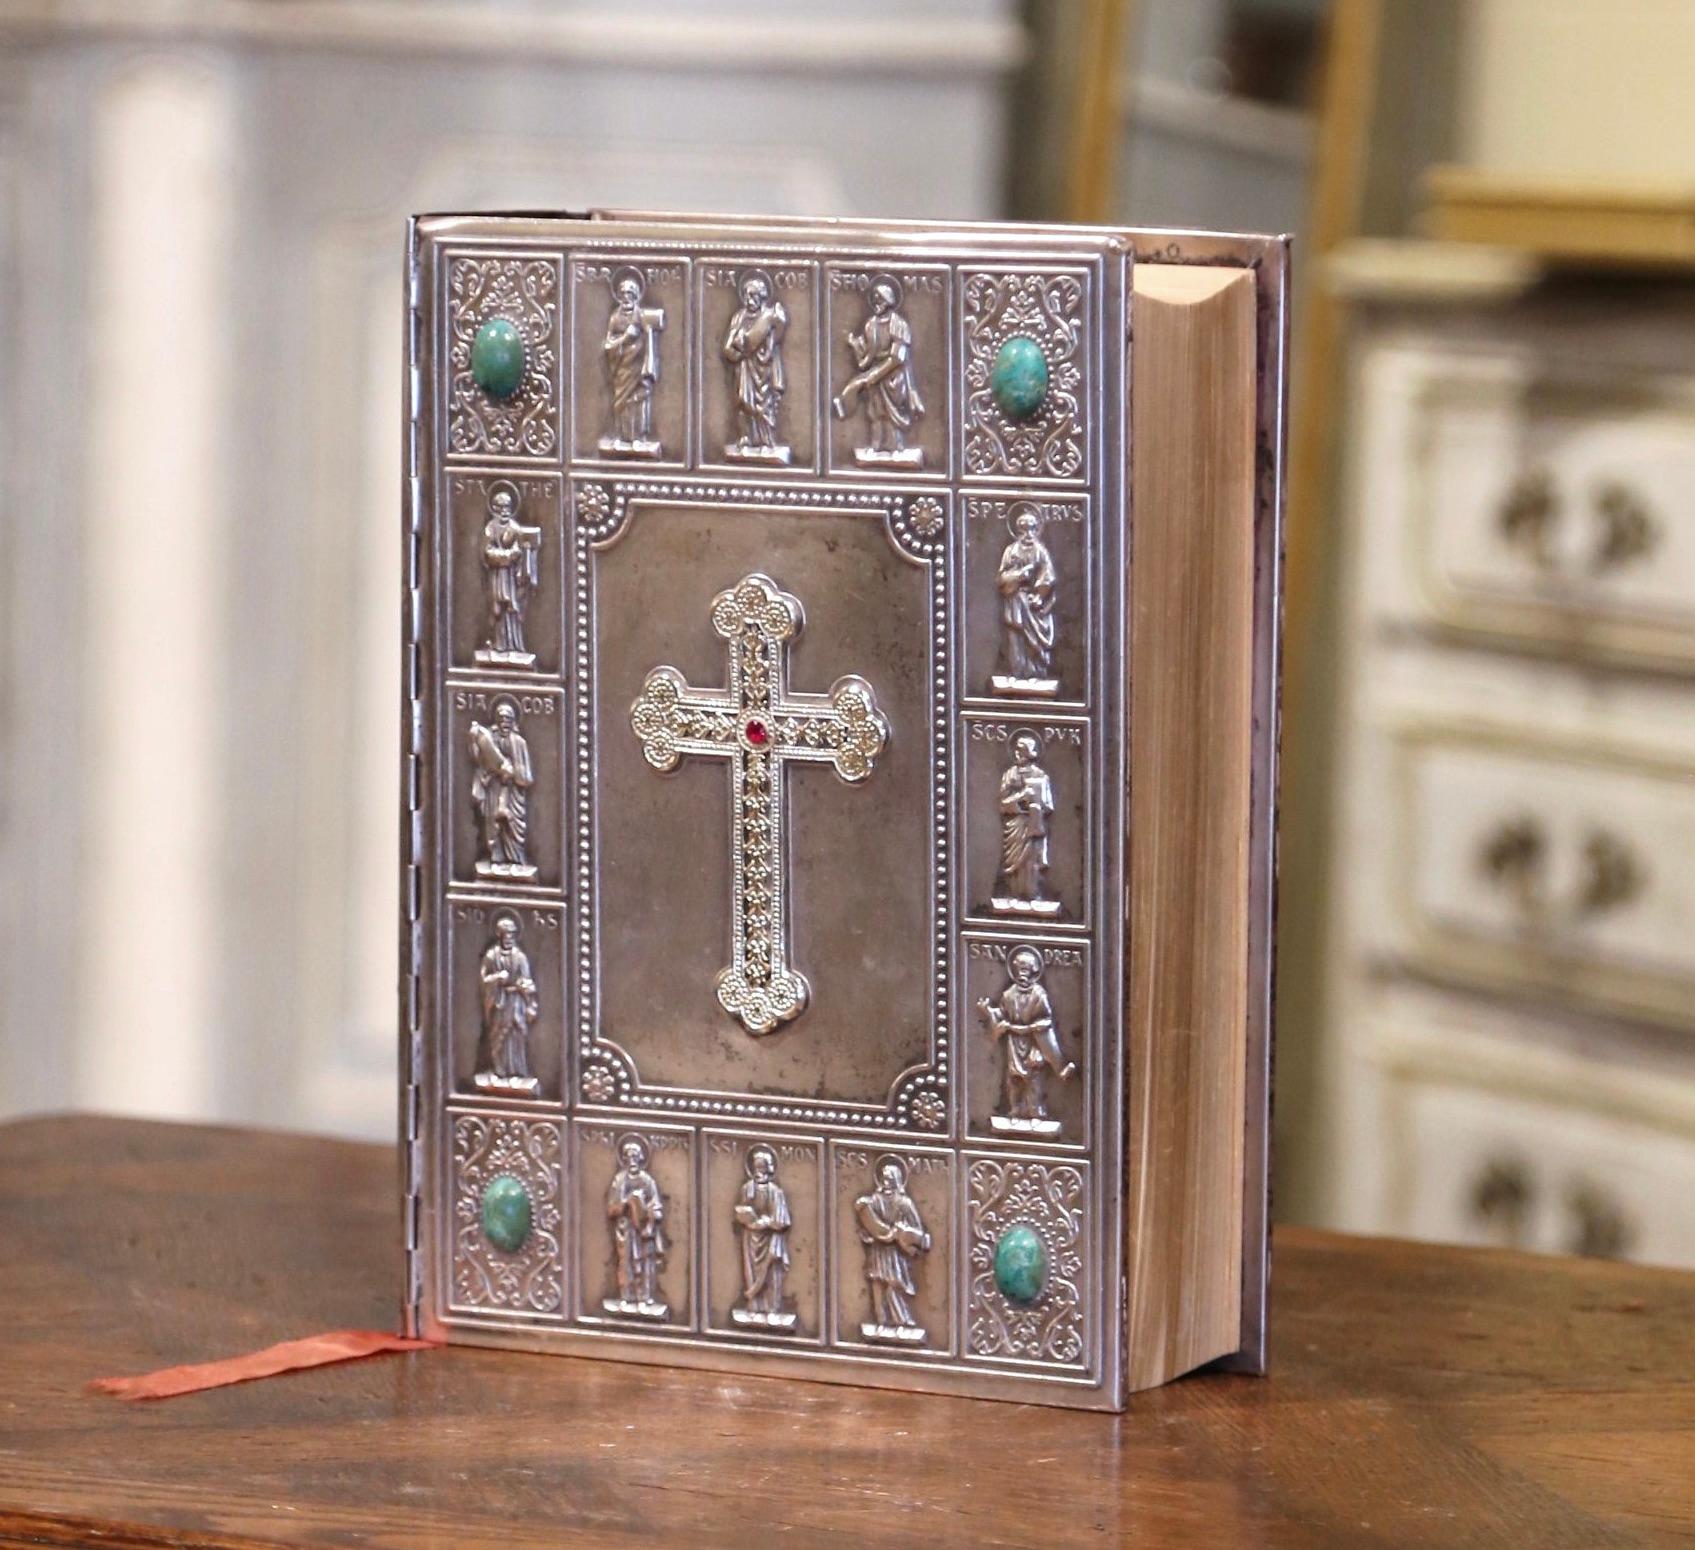 Hand-Crafted Mid-Century French Holy Bible with Silver Plated Repousse Cover Dated 1960